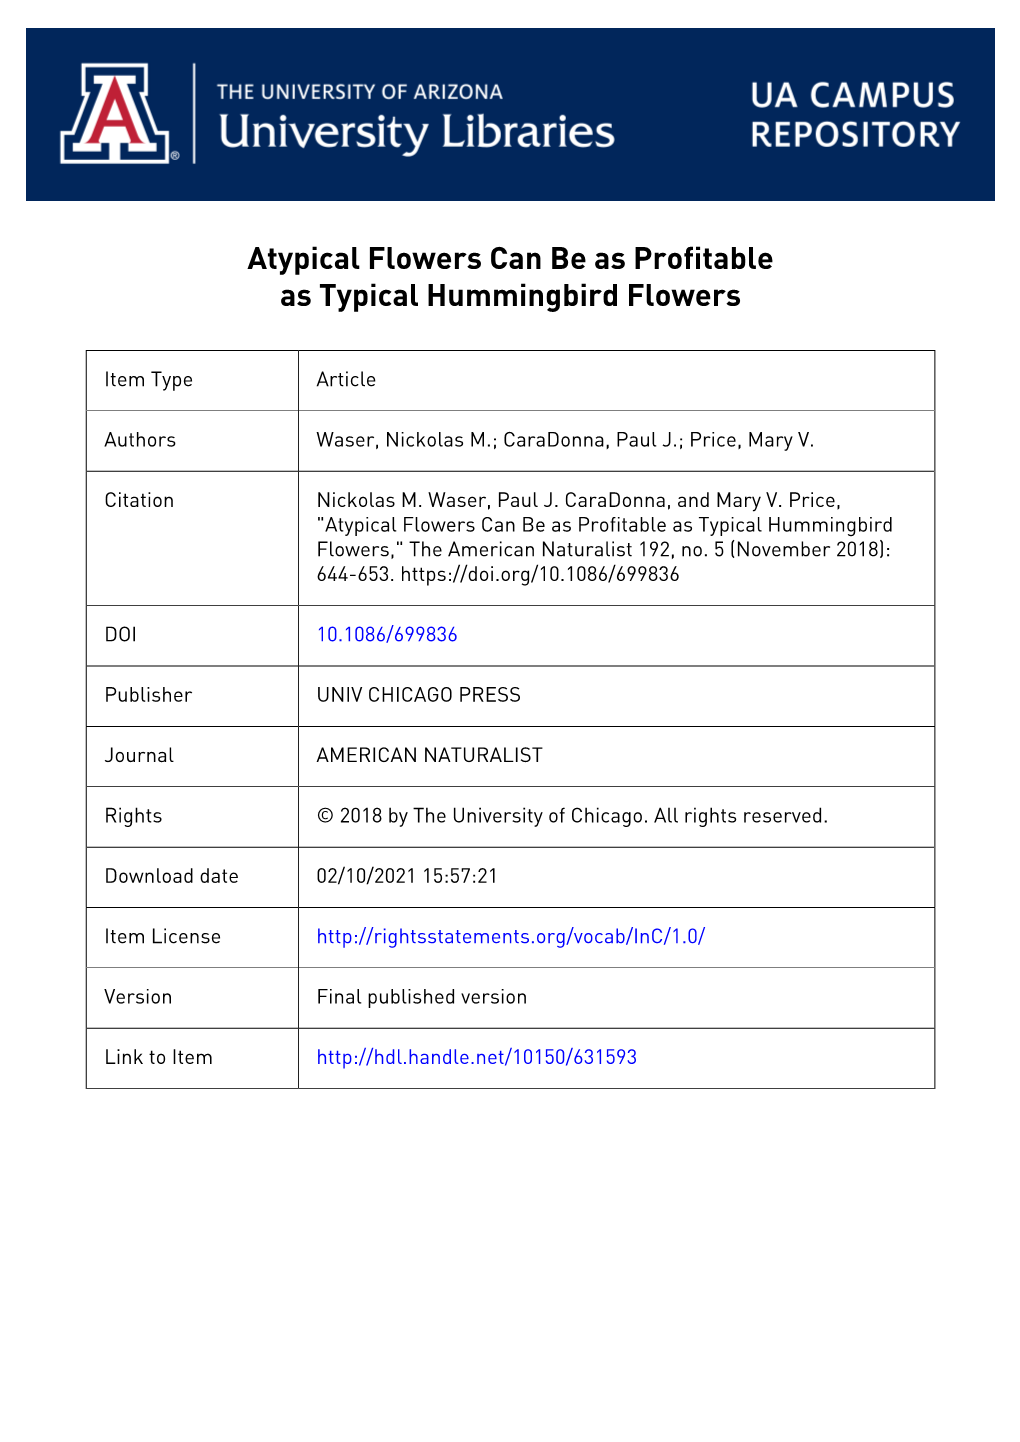 Atypical Flowers Can Be As Profitable As Typical Hummingbird Flowers